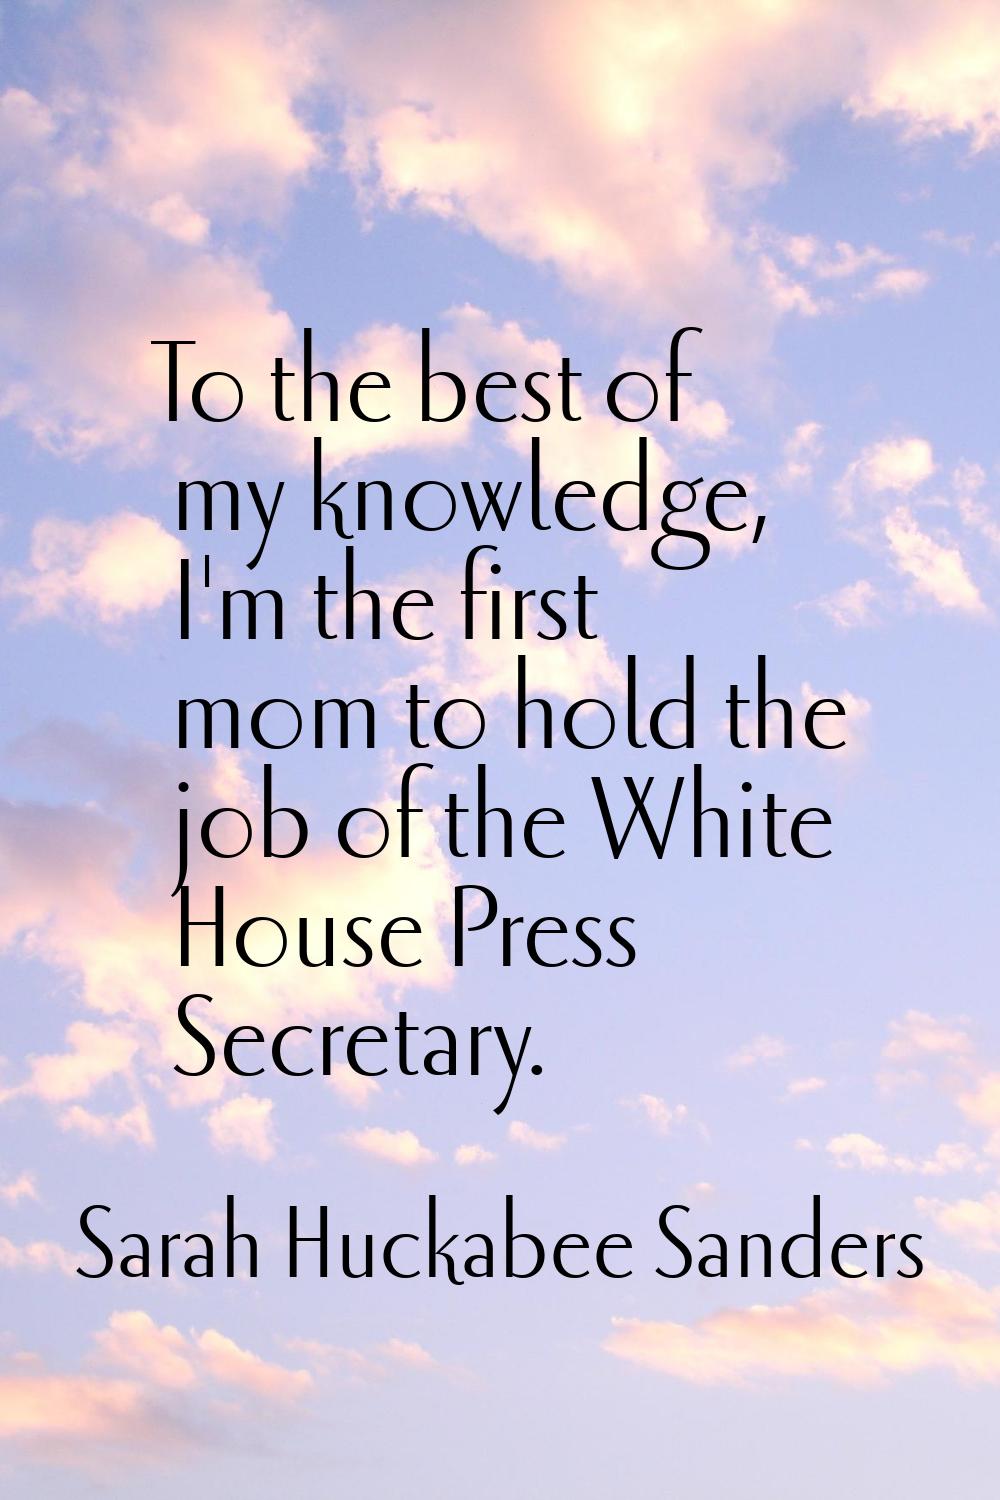 To the best of my knowledge, I'm the first mom to hold the job of the White House Press Secretary.